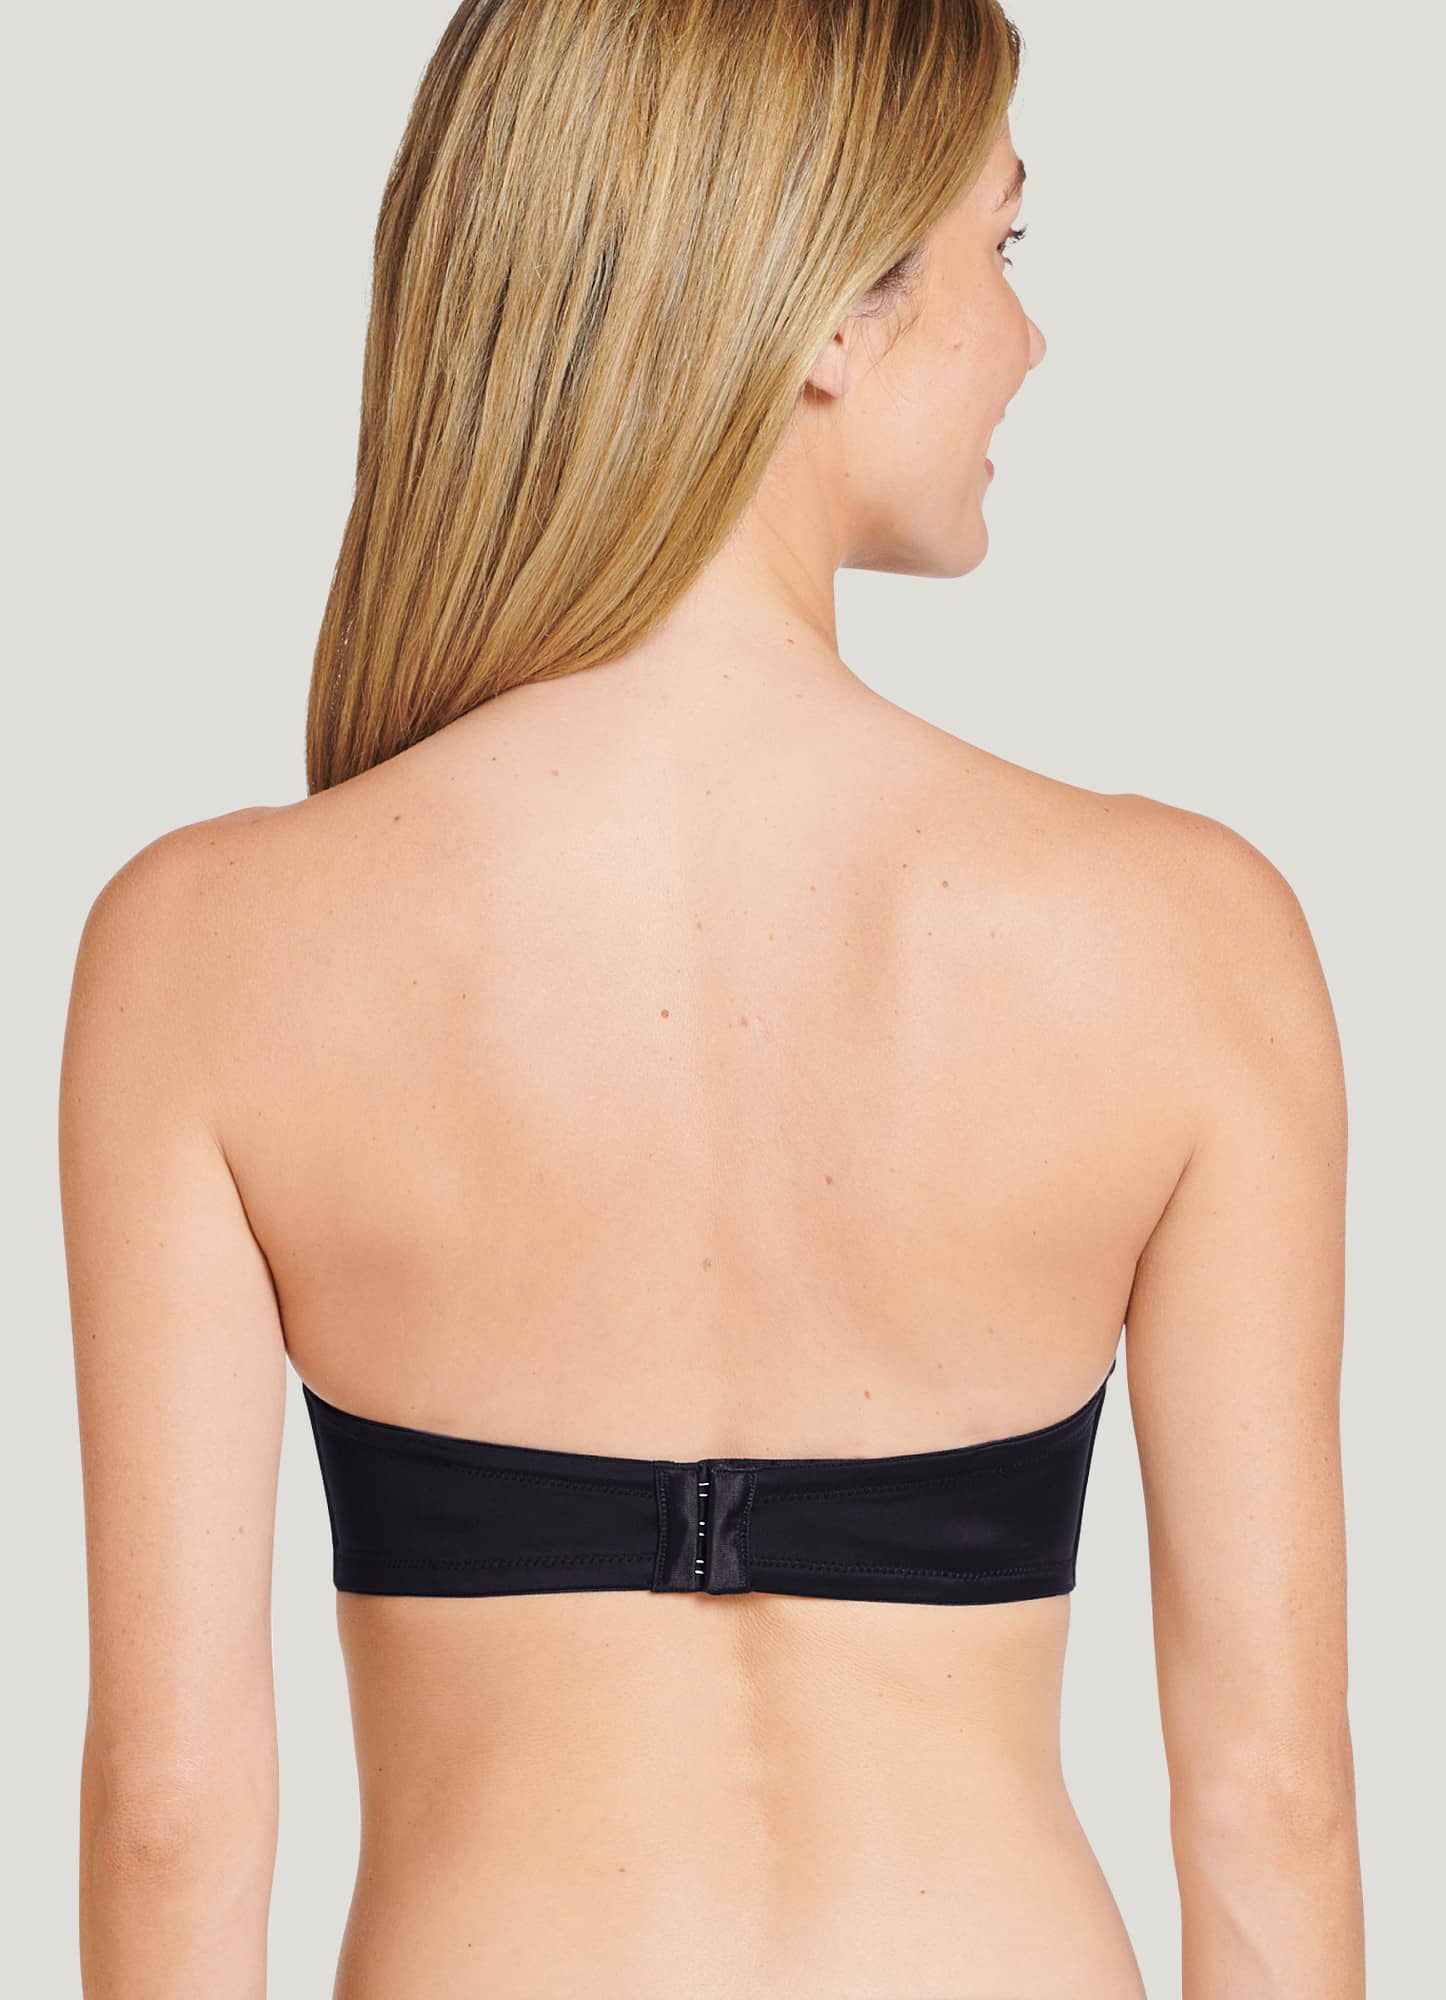 Buy Padded Wired Strapless Bra with Interchangeable Back Strap